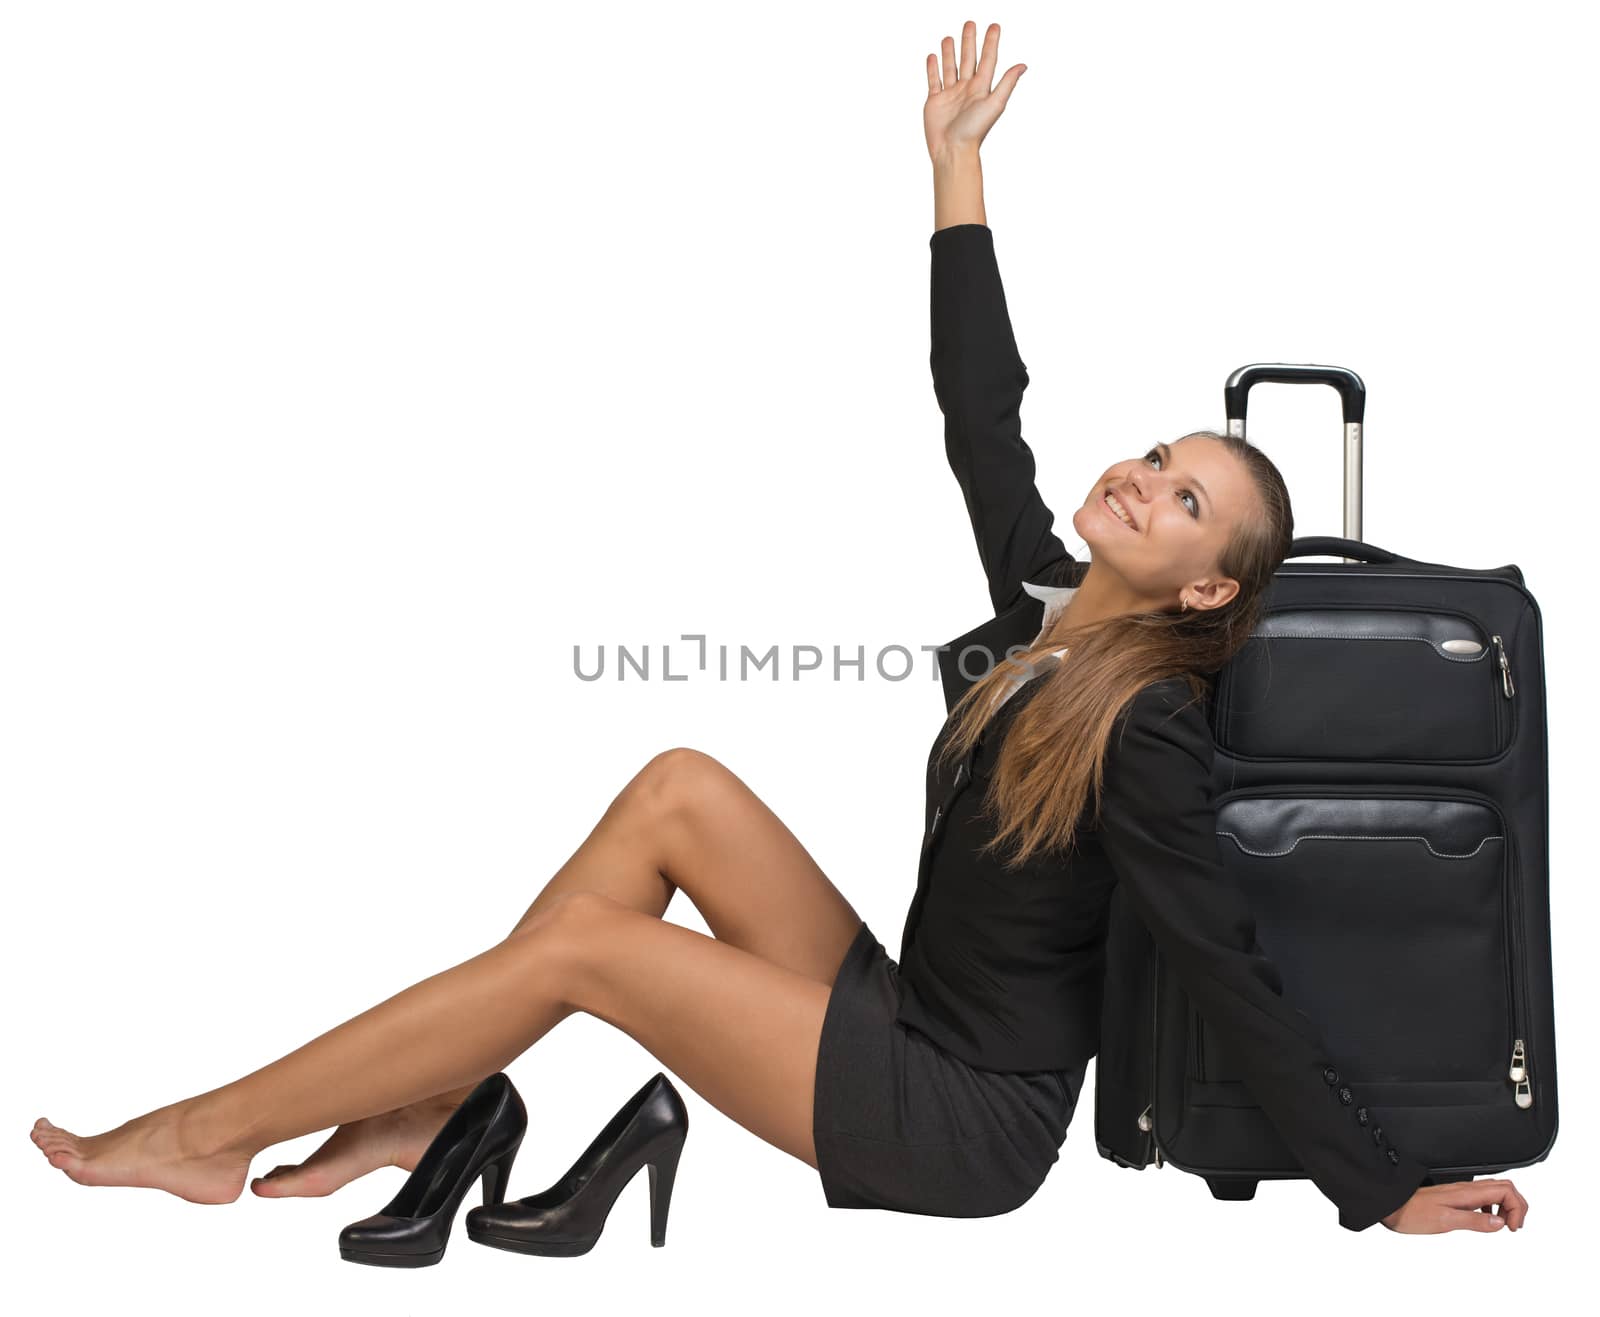 Businesswoman with her shoes off sitting next to front view suitcase by cherezoff